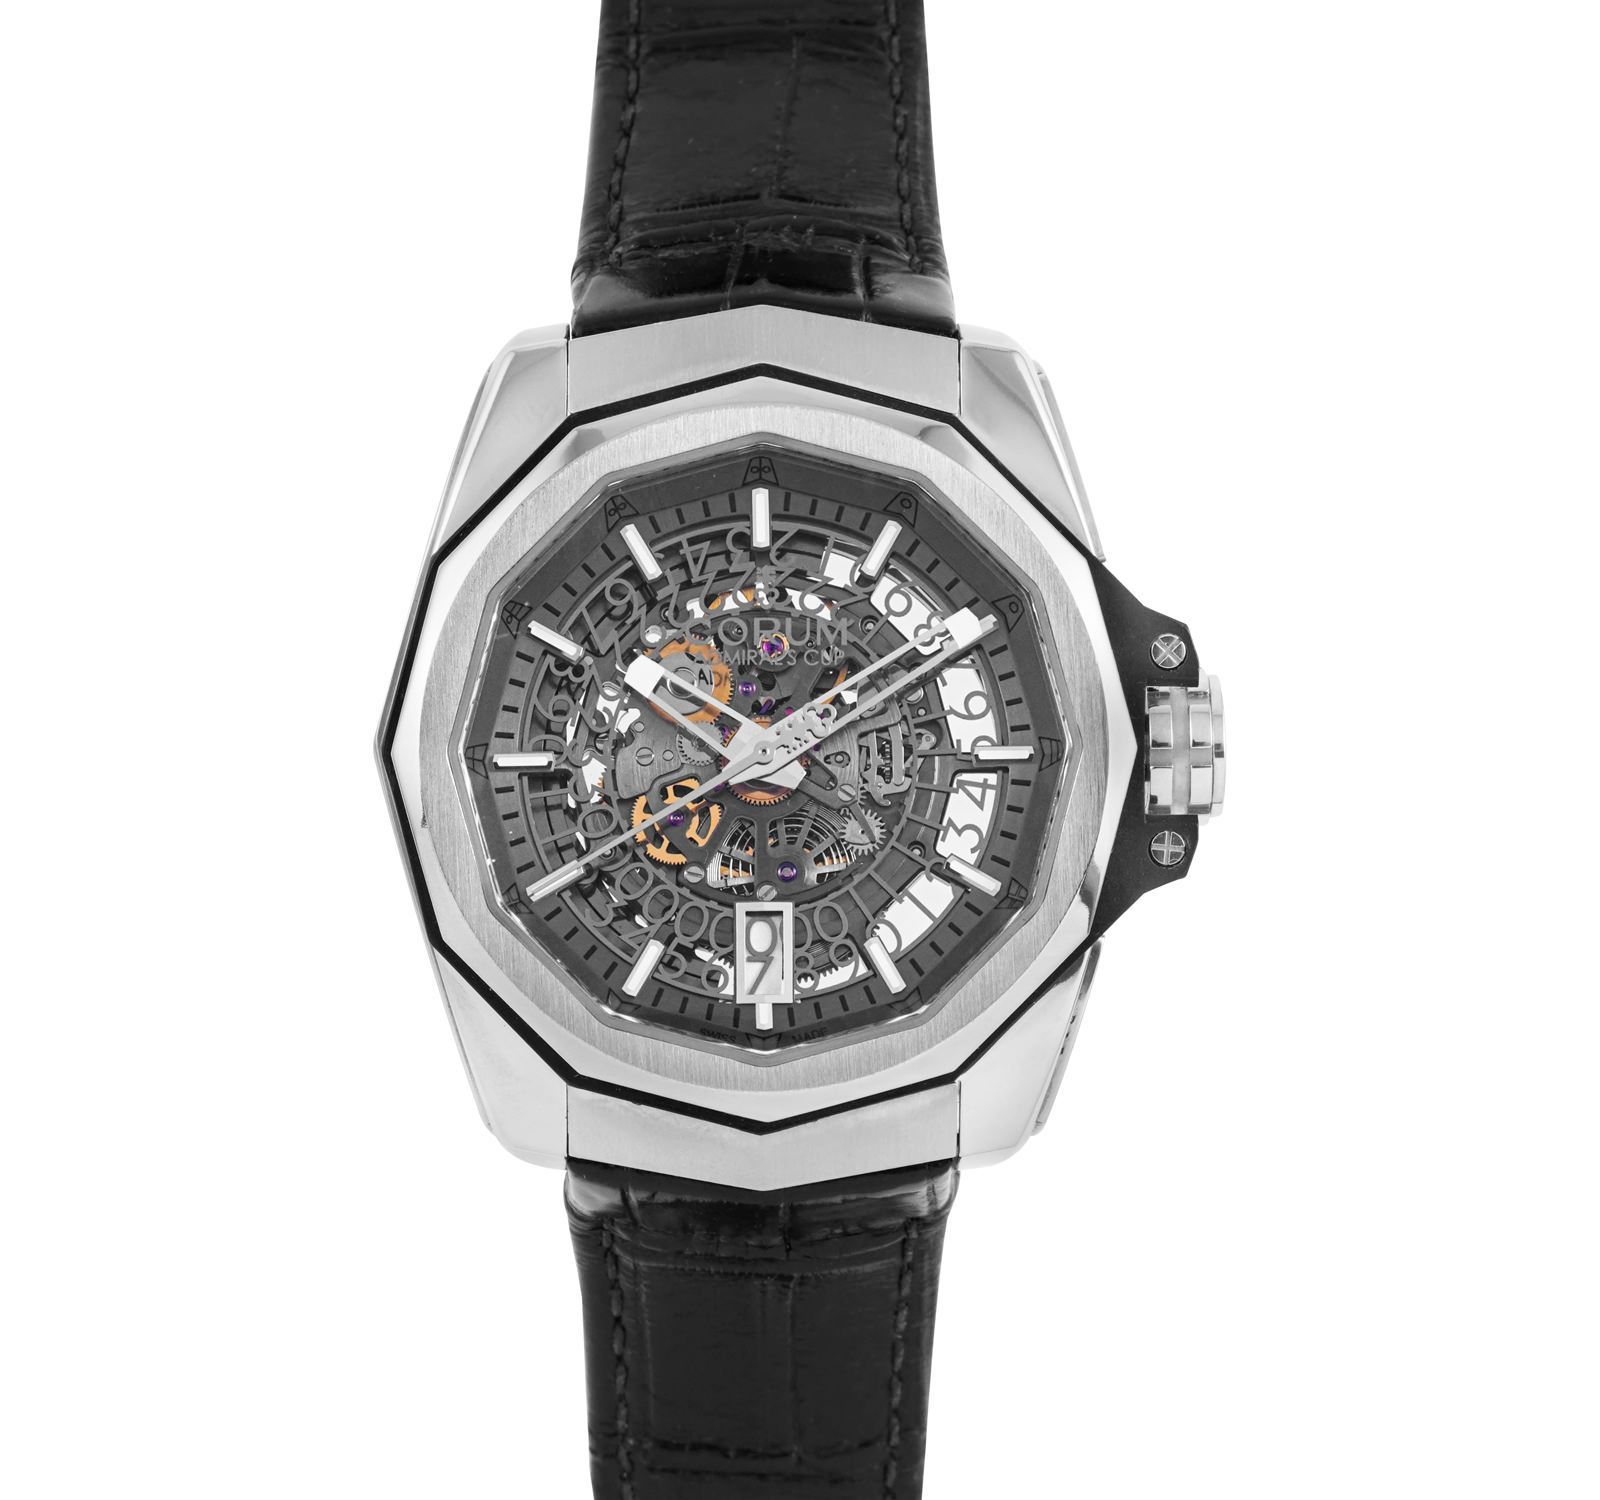 Pre-Owned Corum Admiral